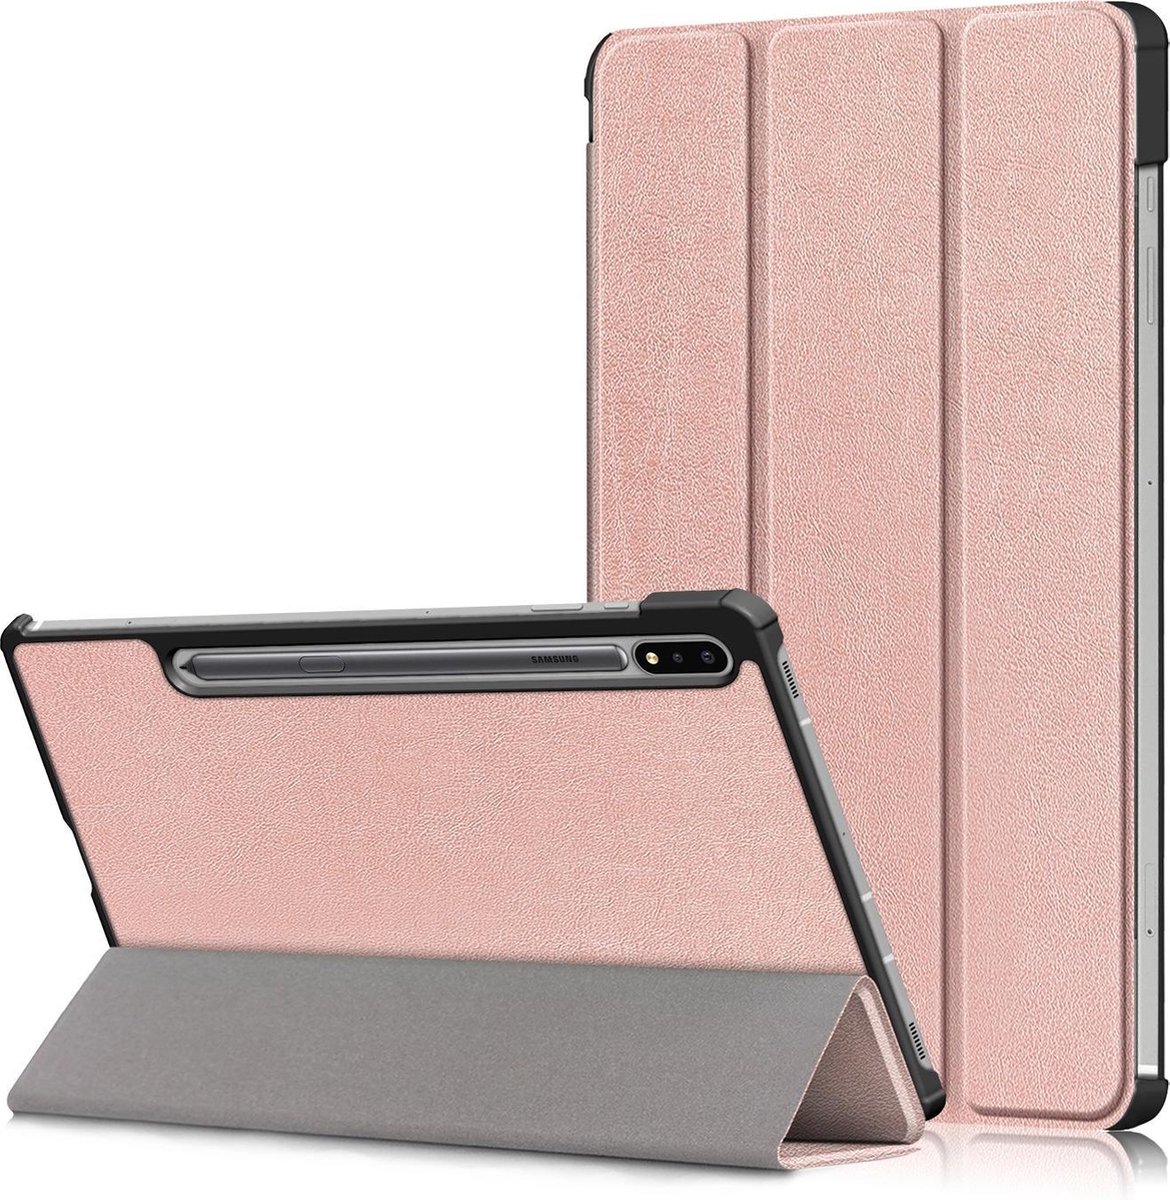 Samsung Galaxy Tab S7 2020 Hoesje - 11 inch - Samsung Tab S7 Hoes Tri fold book case - Back Cover Rose Goud